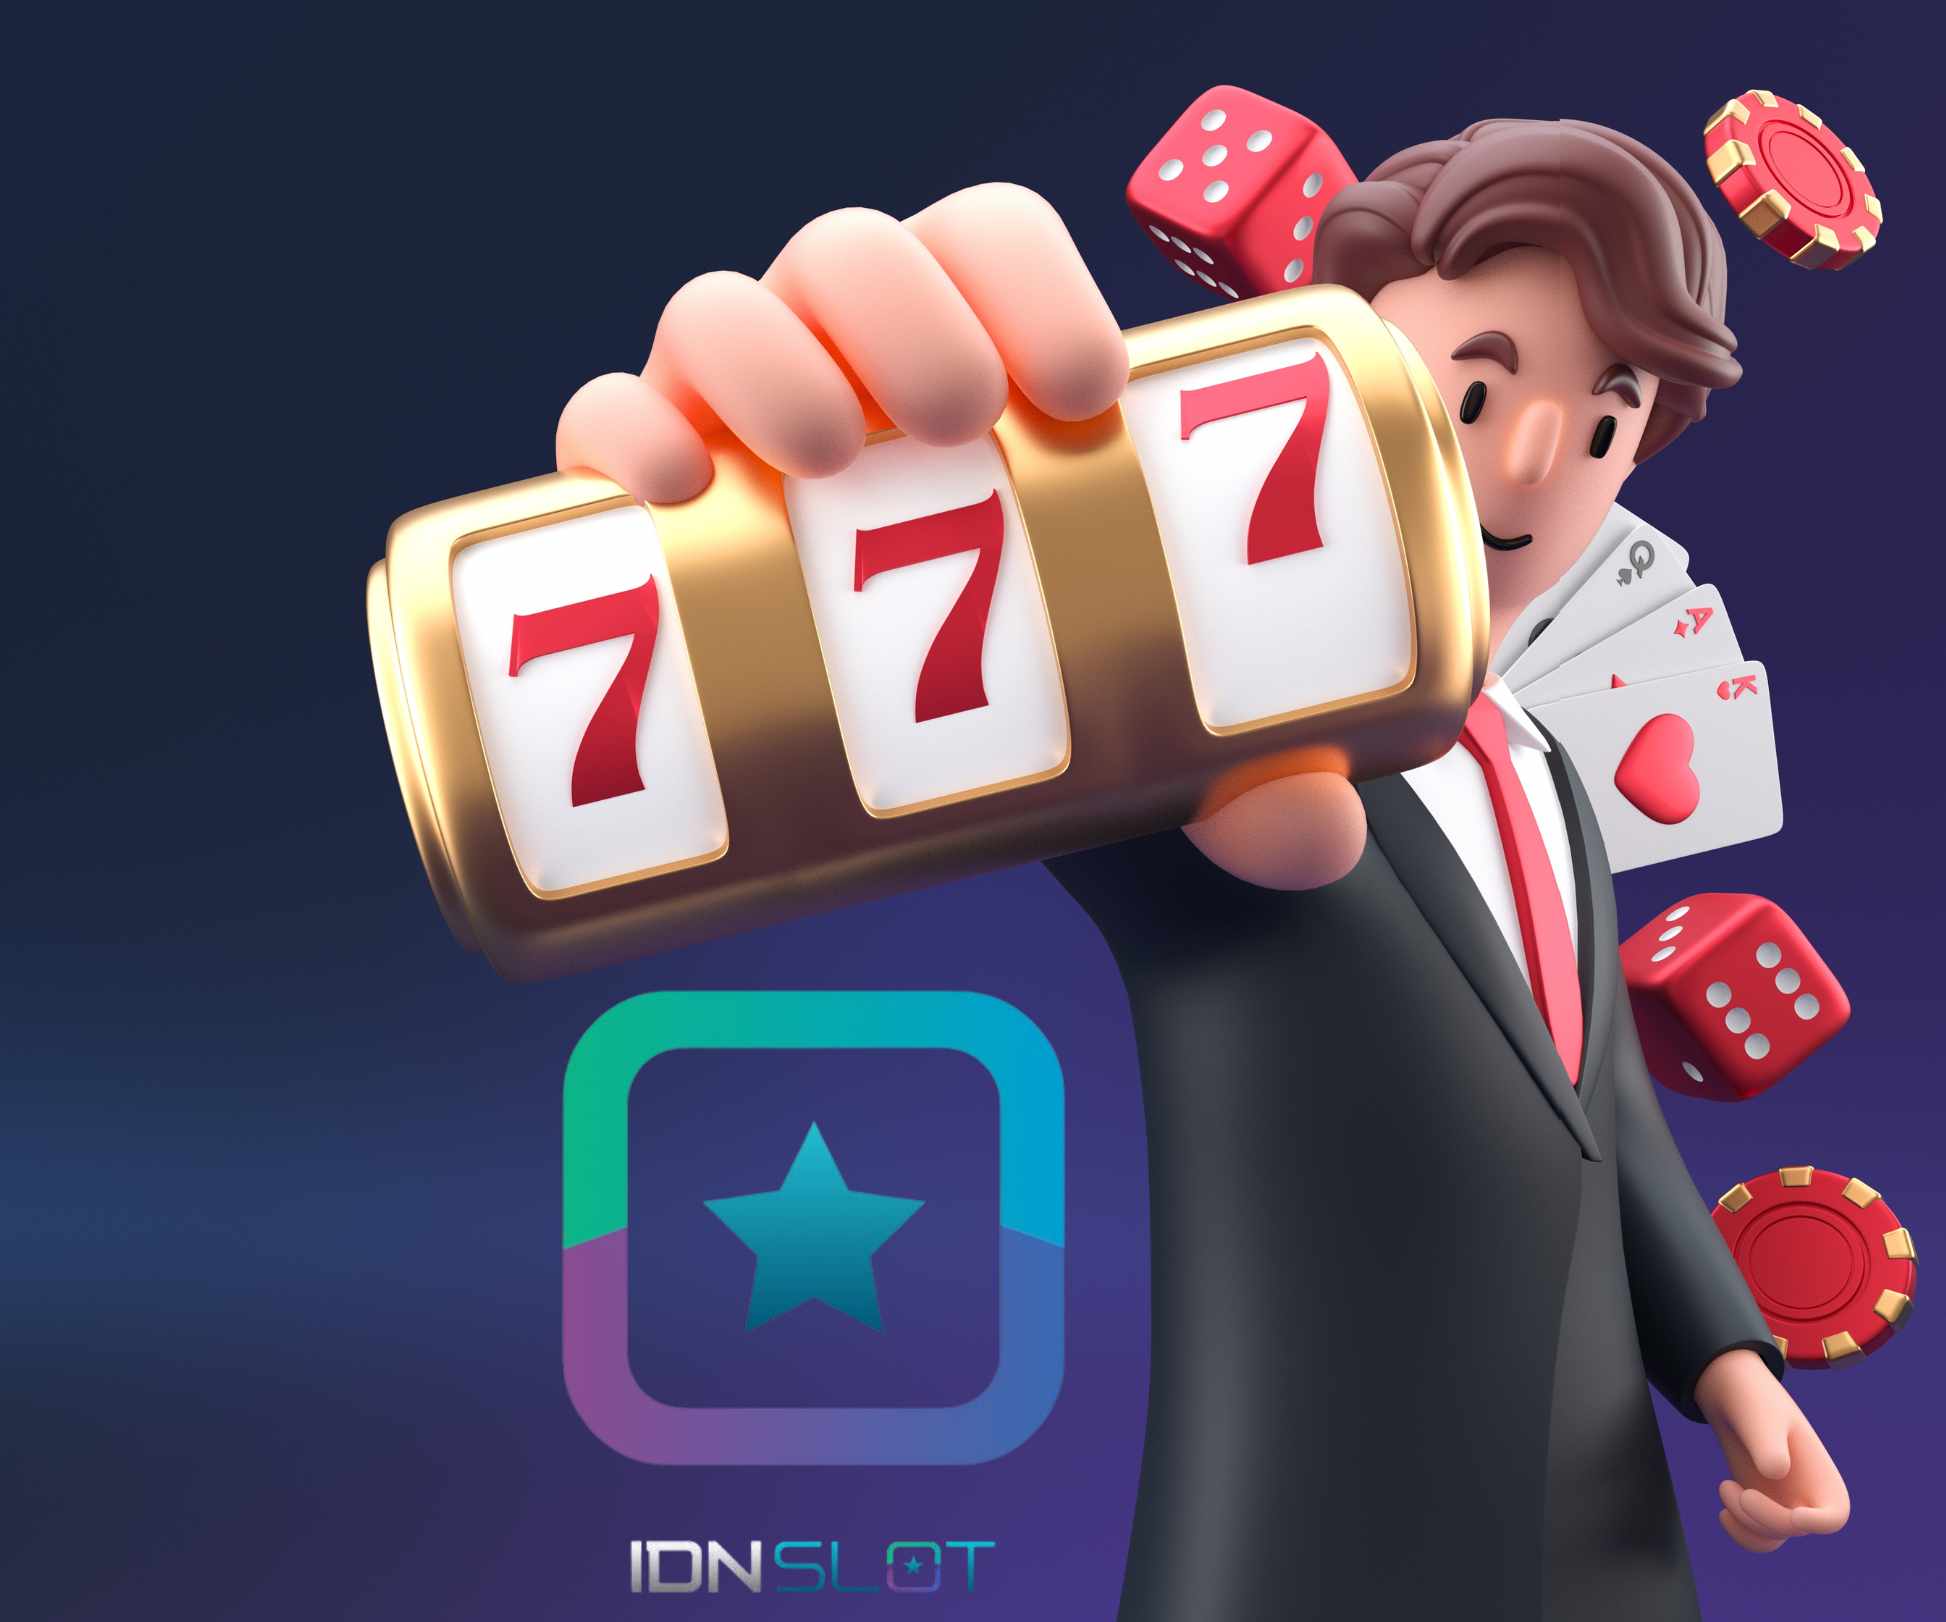 The right key to playing idn slot on the janjiwin site